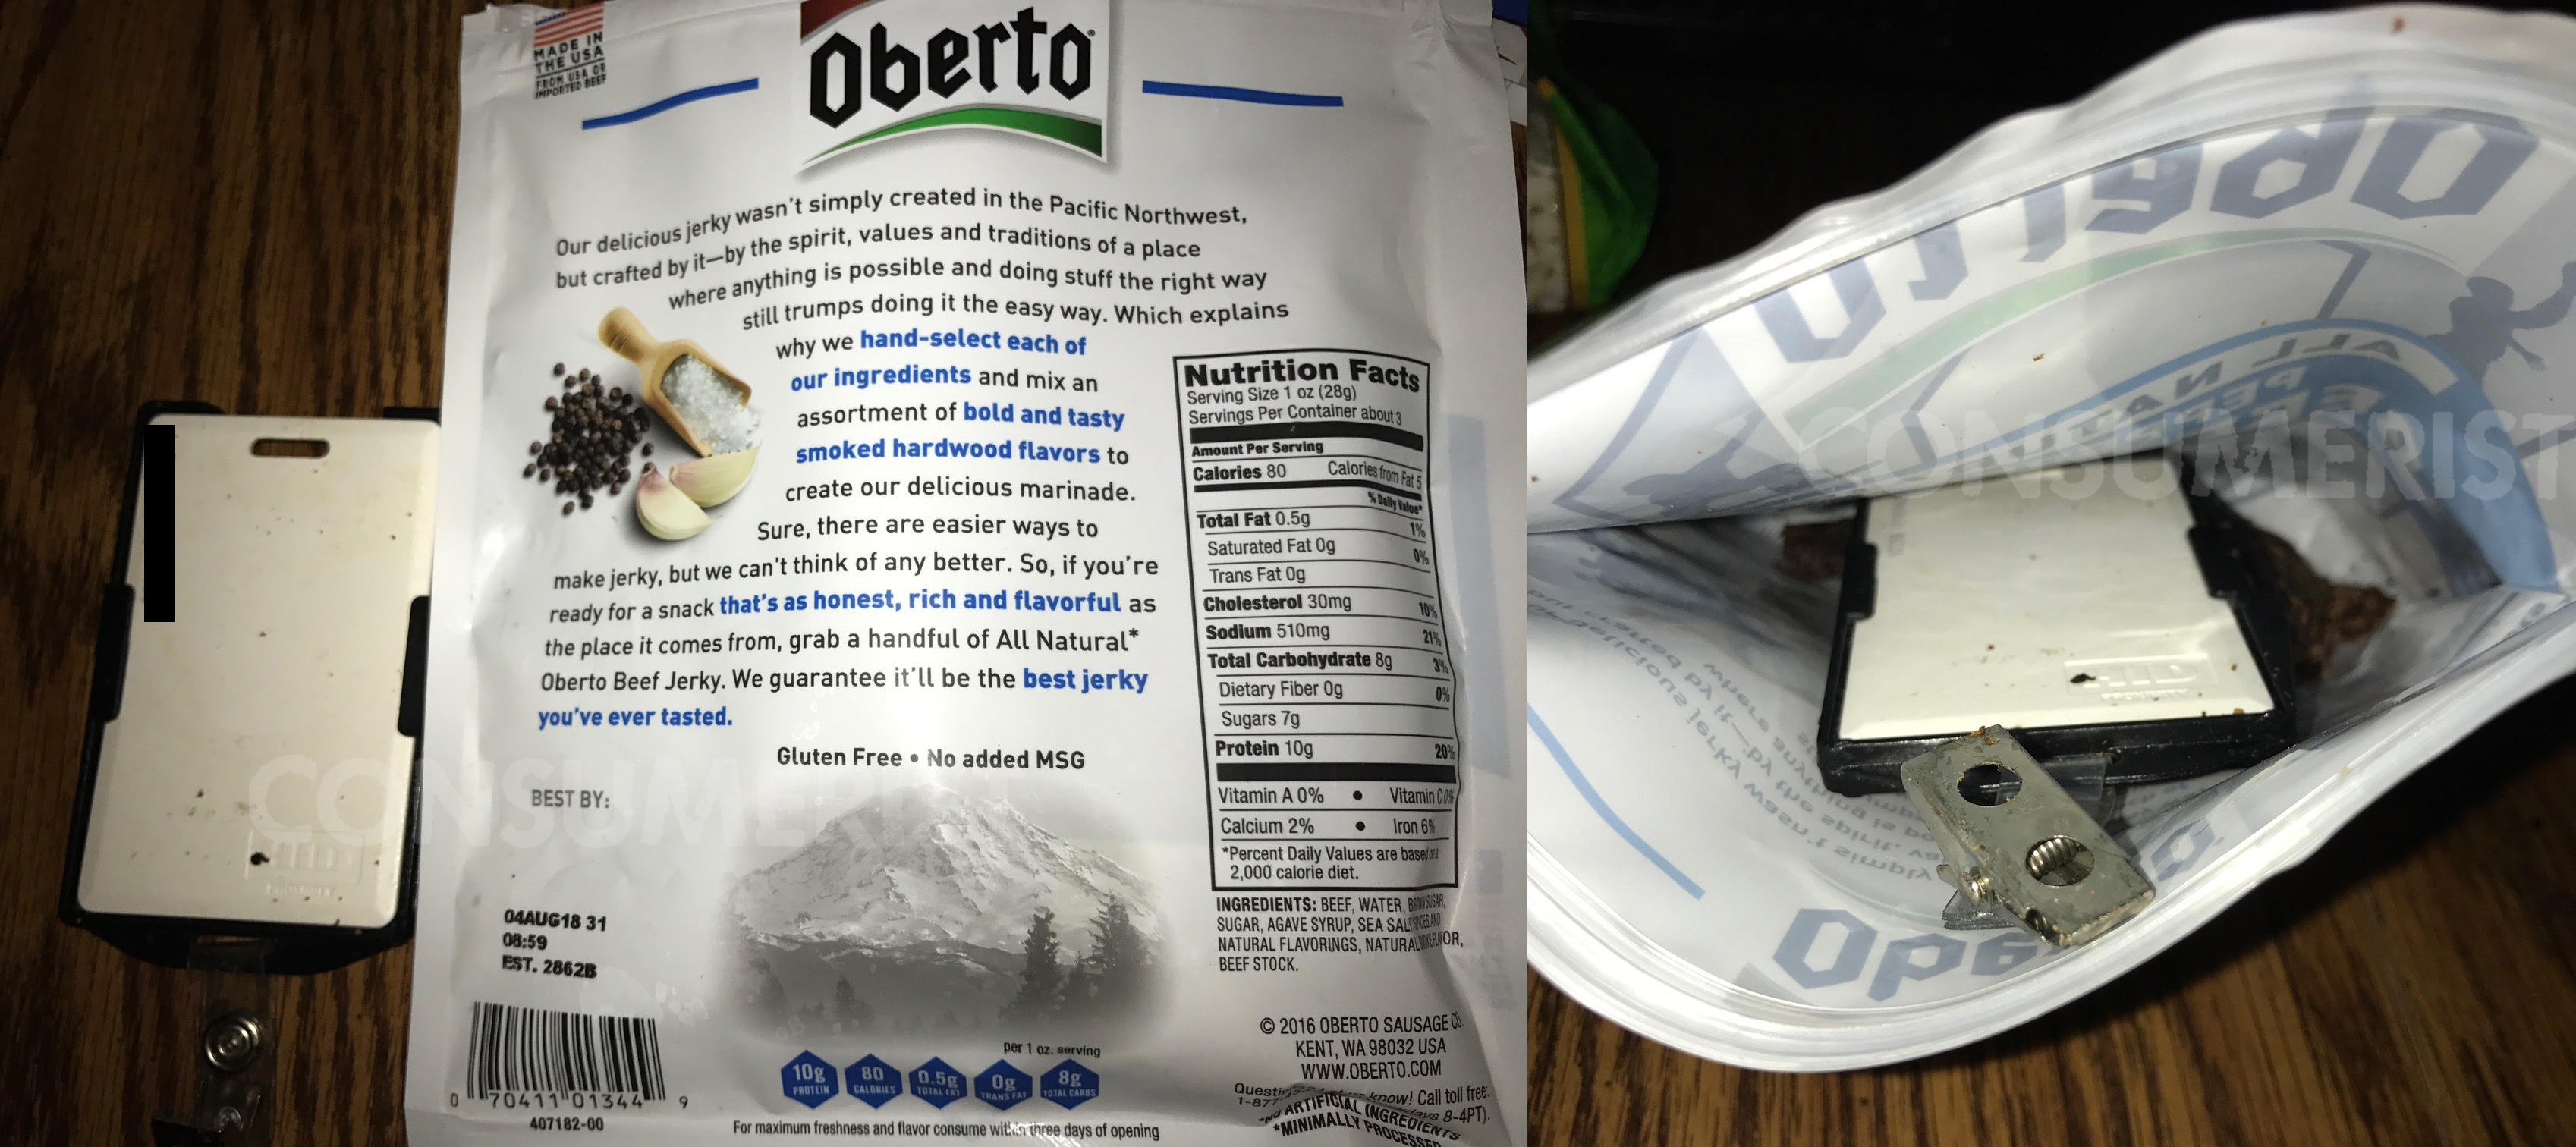 UPDATE: Company Apologizes To Customer Who Found Employee ID Badge In Her Jerky